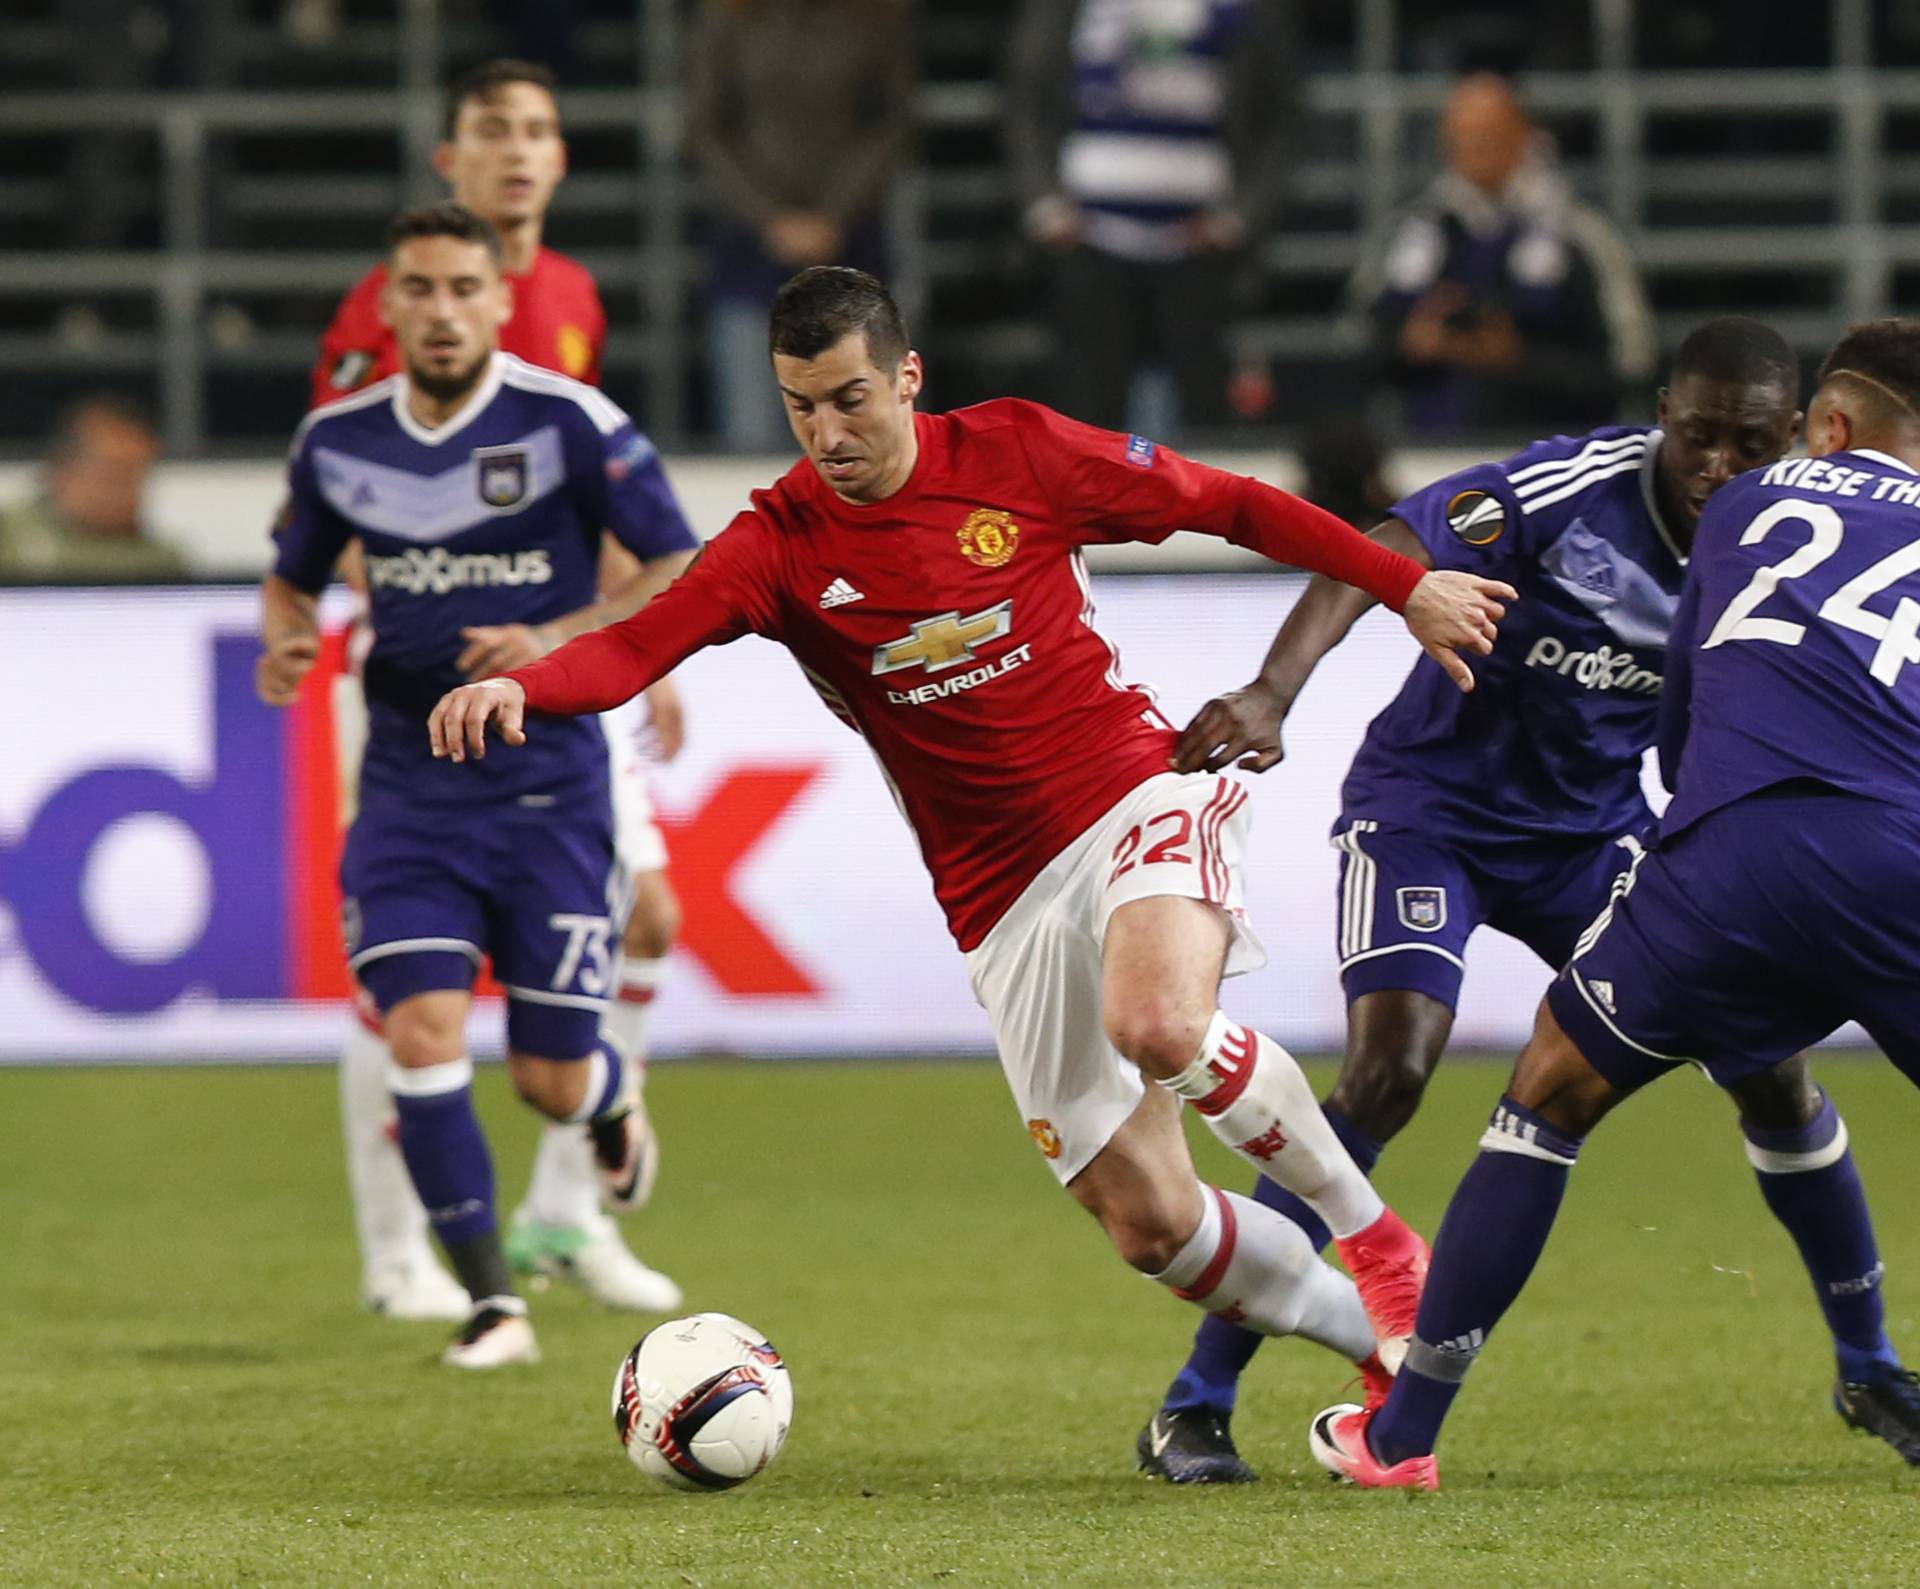 Manchester United's Henrikh Mkhitaryan in action with Anderlecht's Dennis Appiah